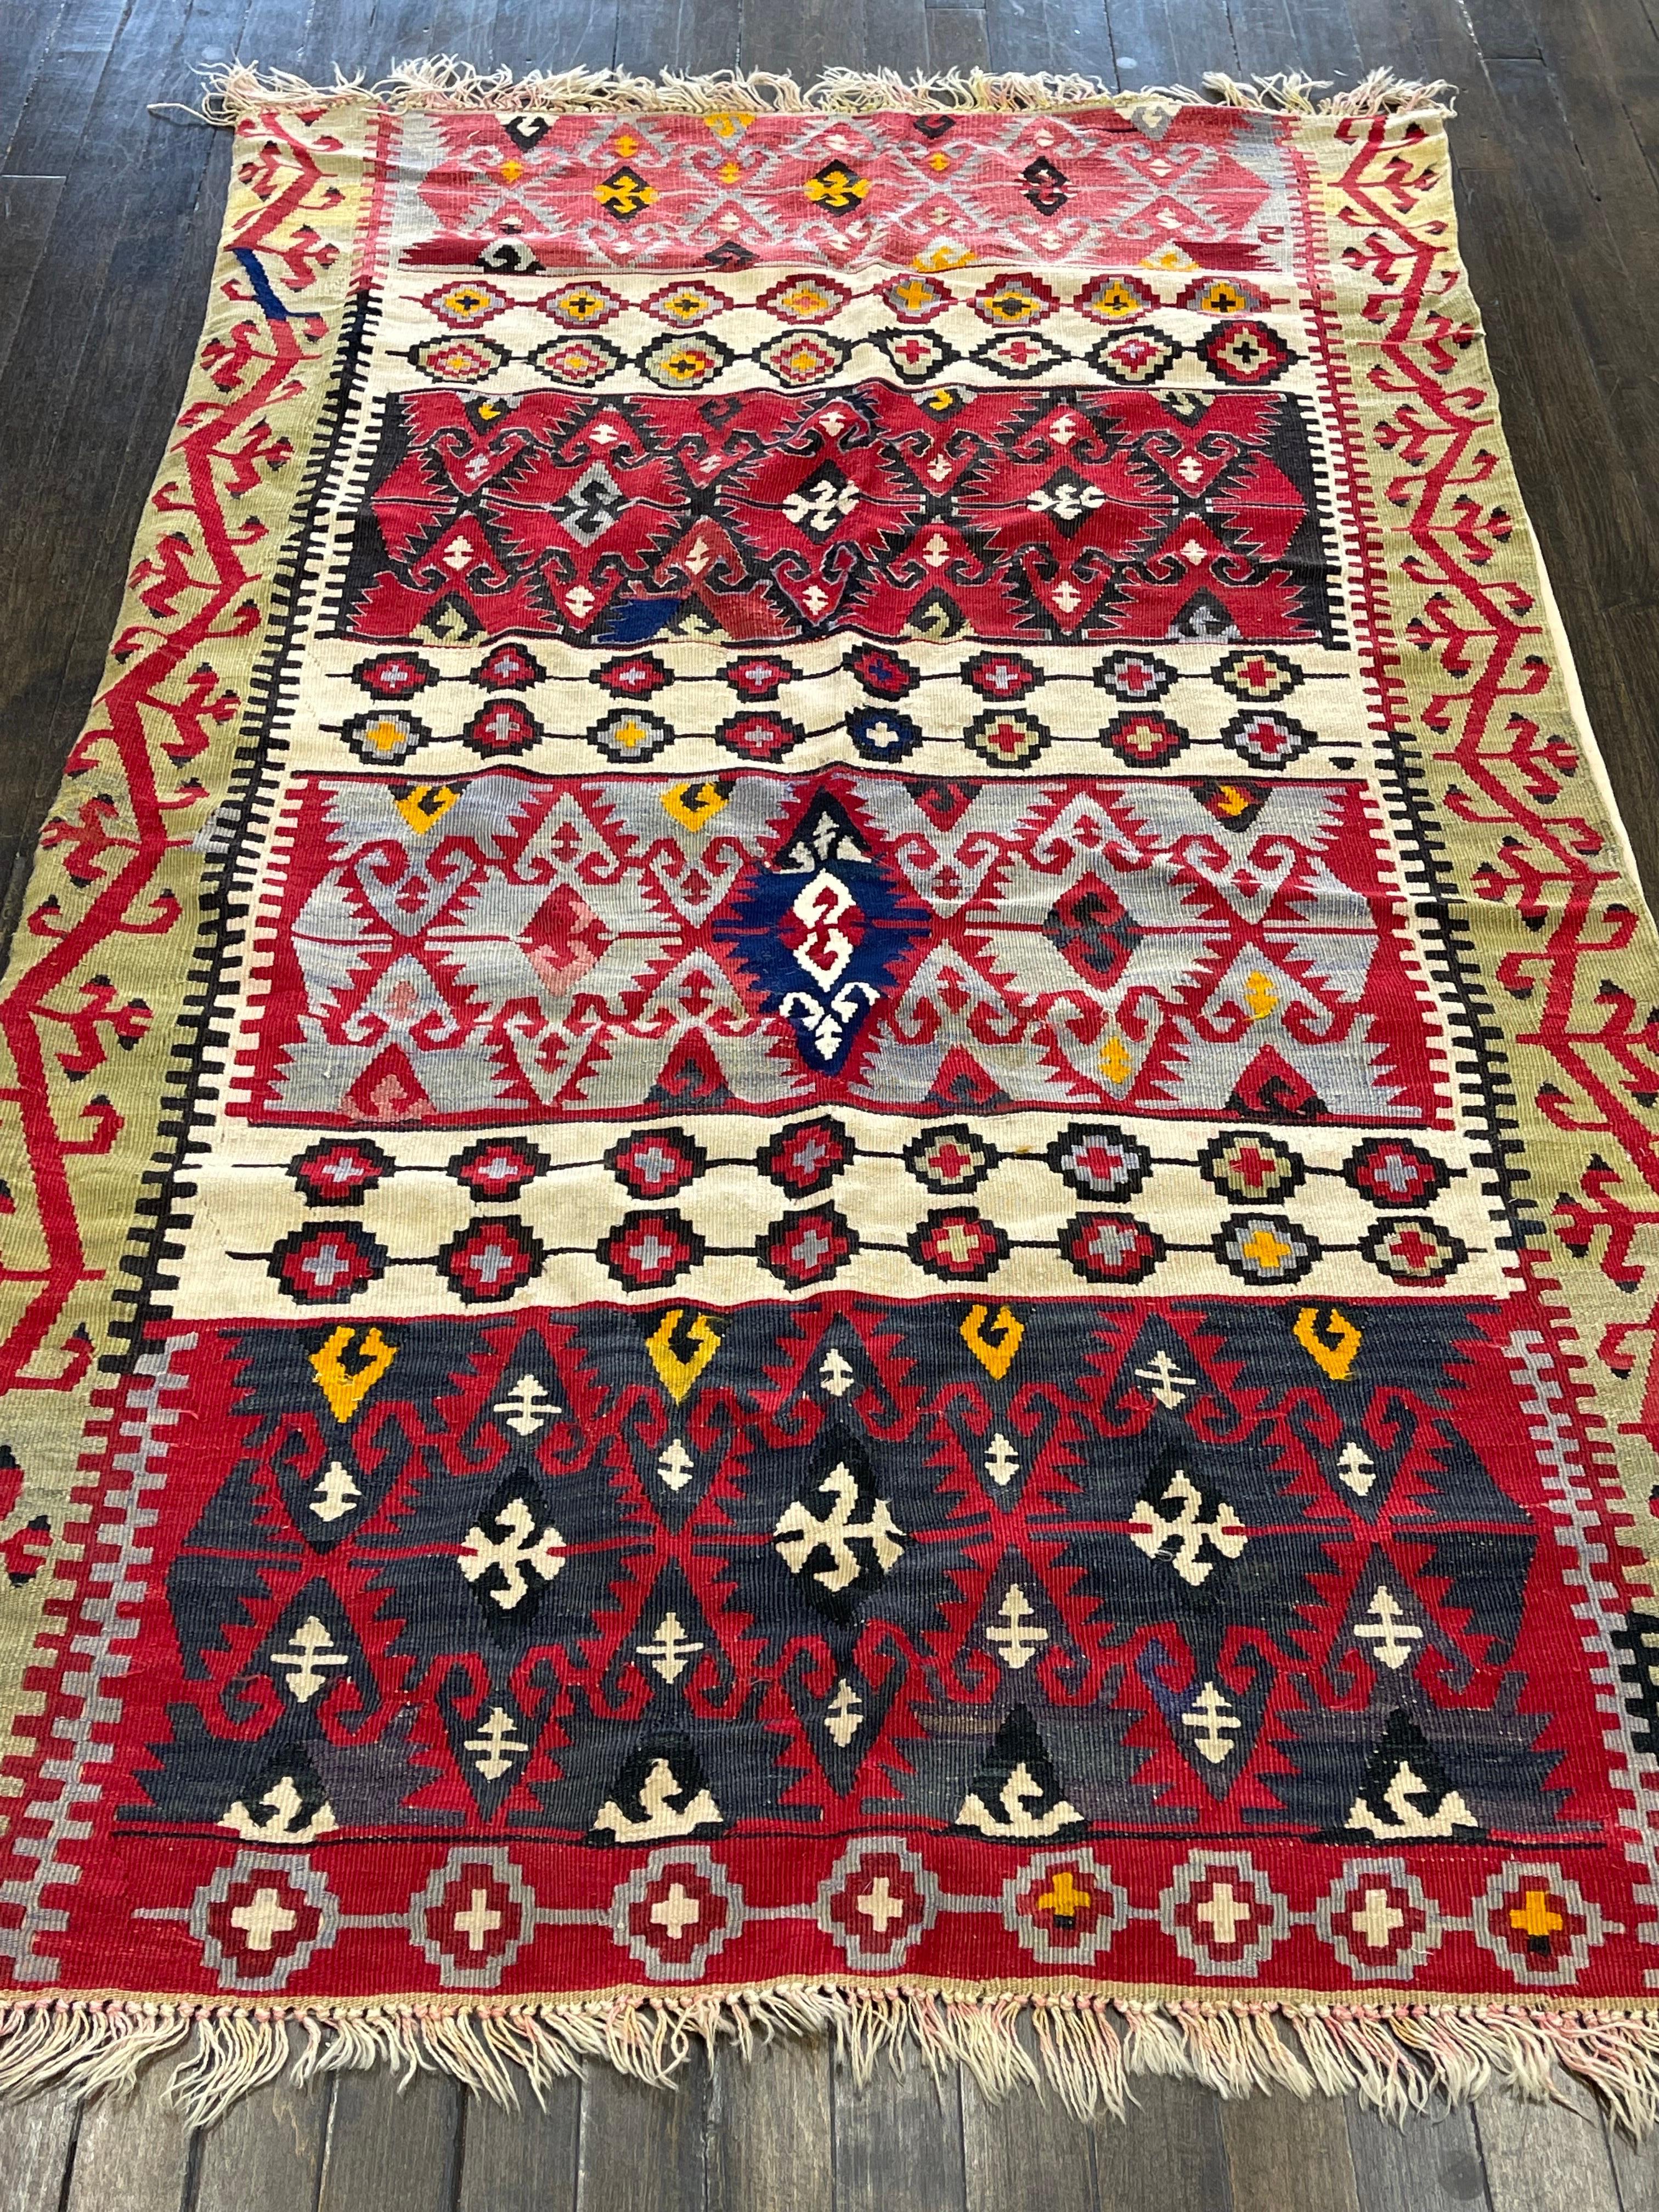 A flat woven kilm, this rug is attributed to Konya of Turkey. The technique used to make this kilm is split tapestry weaving. The design consists of four rectangular panels with vibrant colors separated by three smaller panels all in vivid ivory